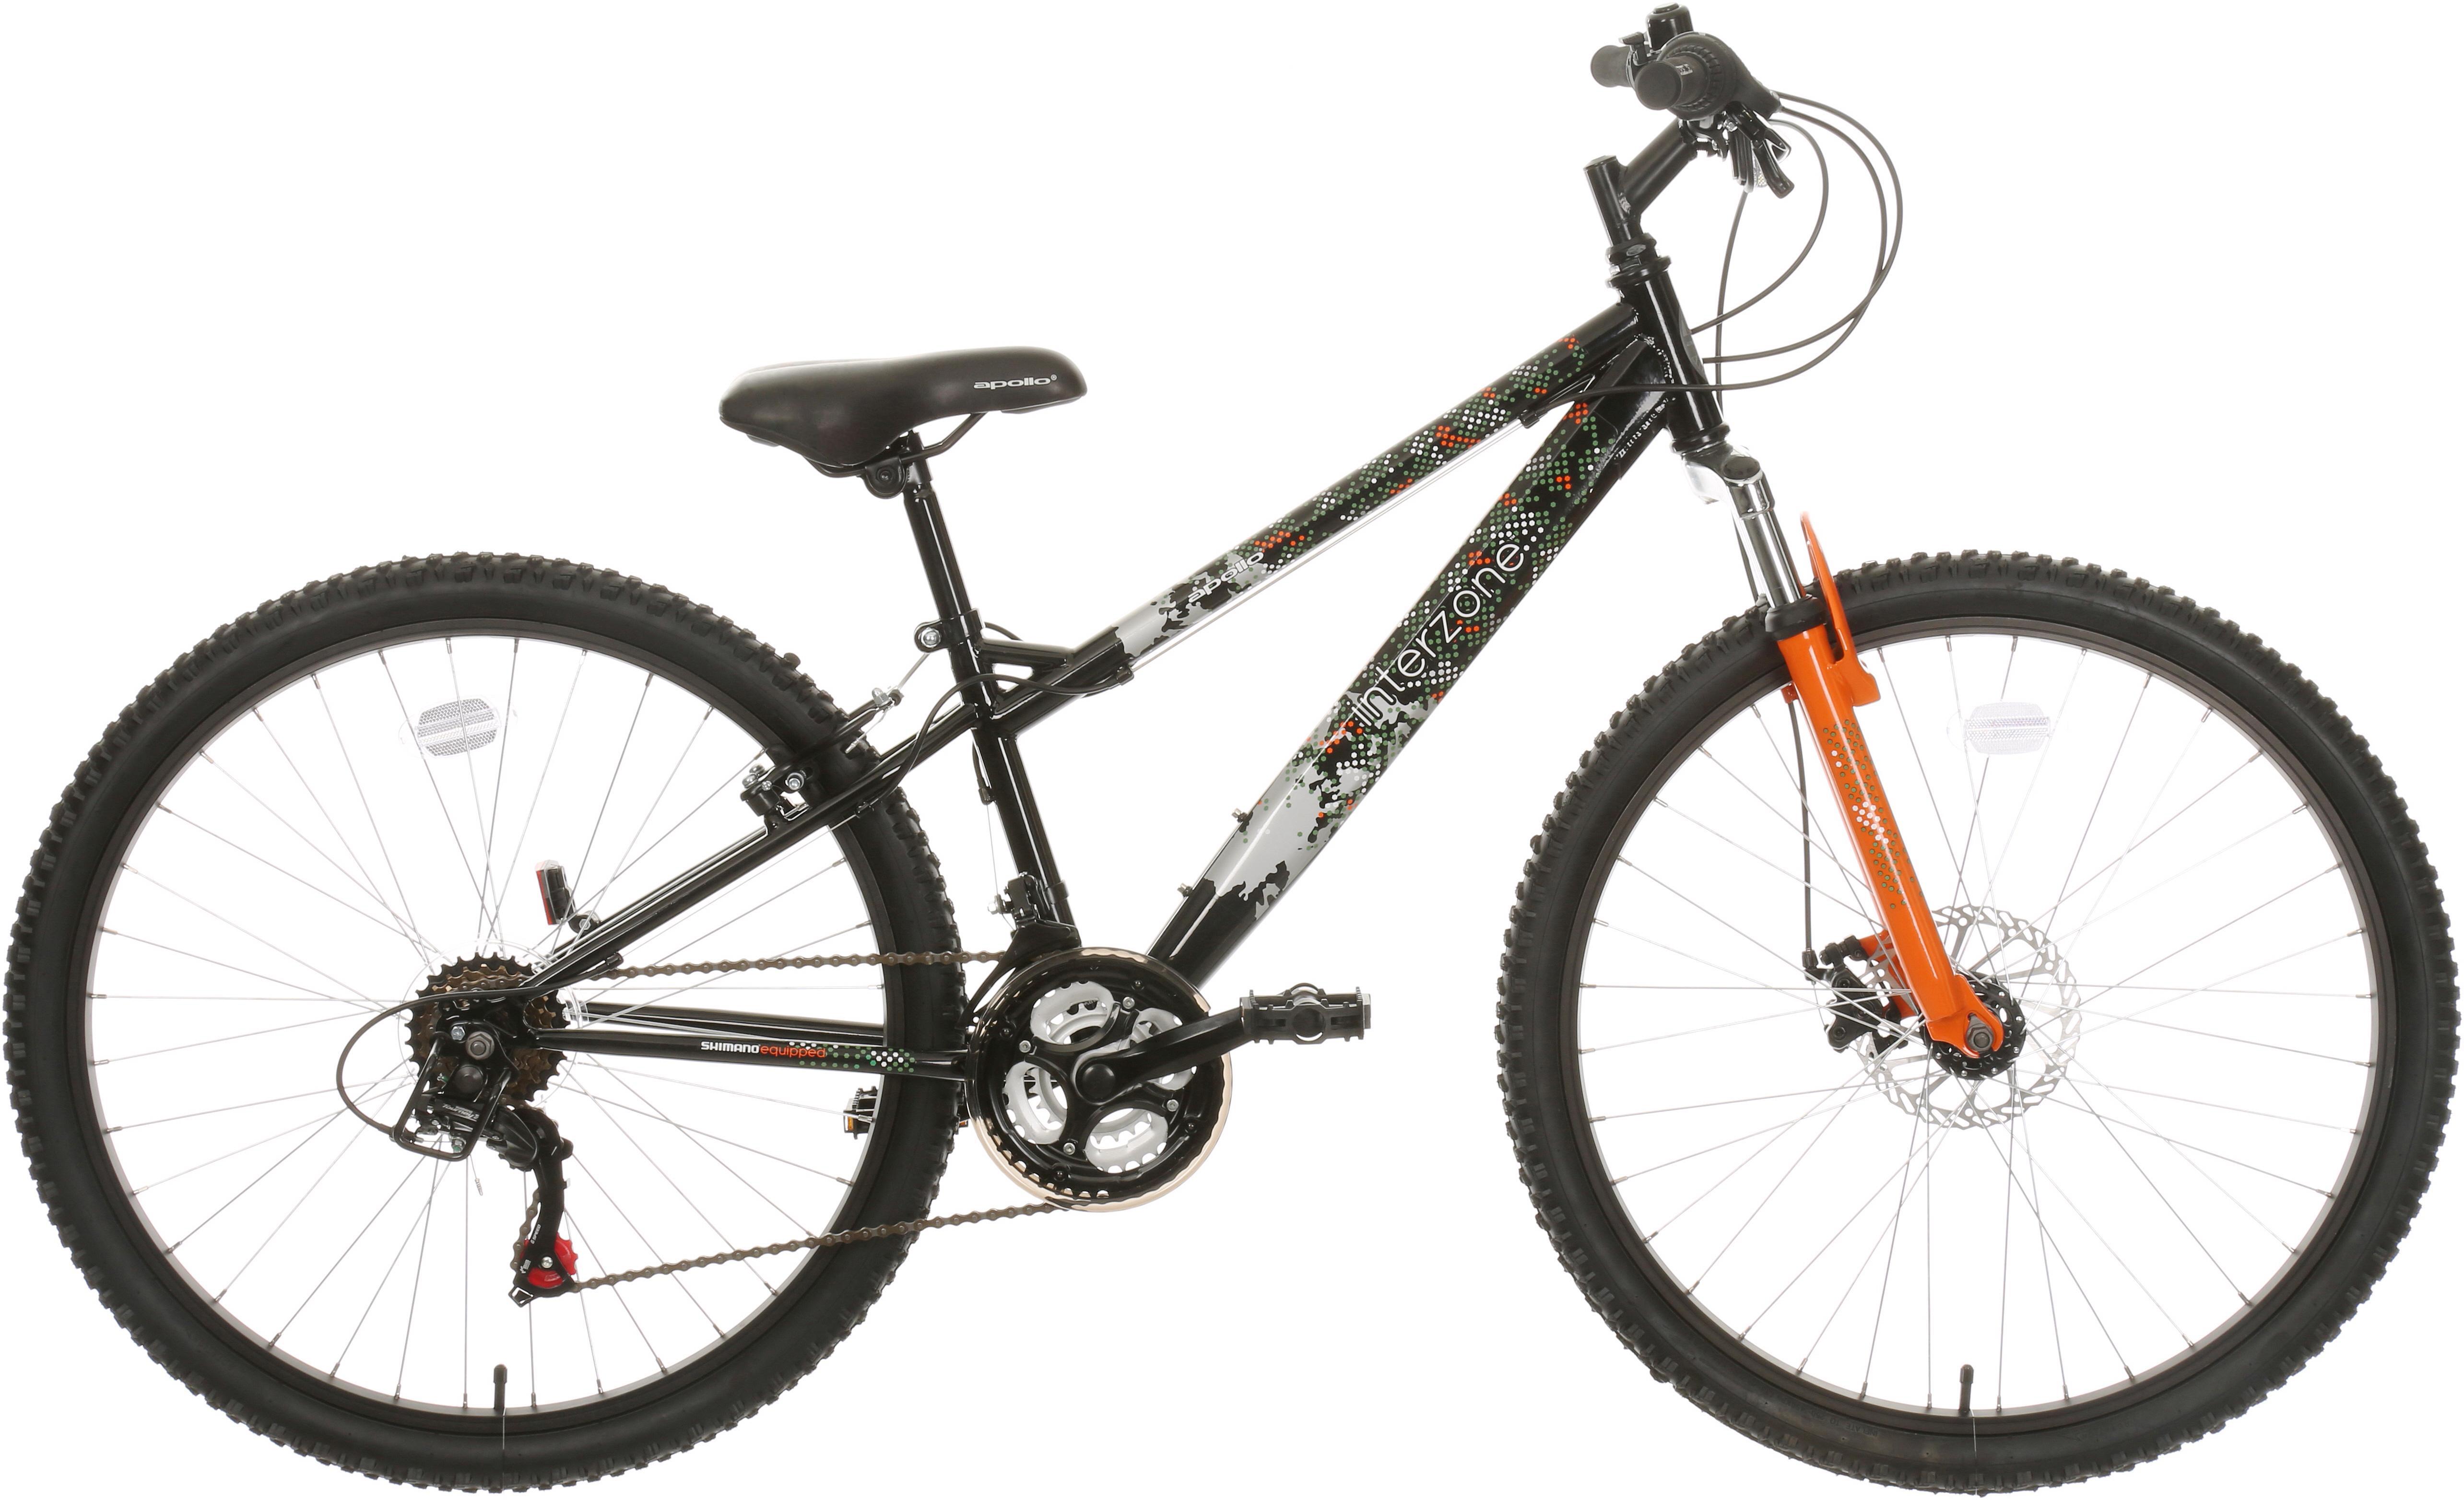 Cheap Mountain Bikes with Offers, Deals and Sales with Wiggle, Halfords